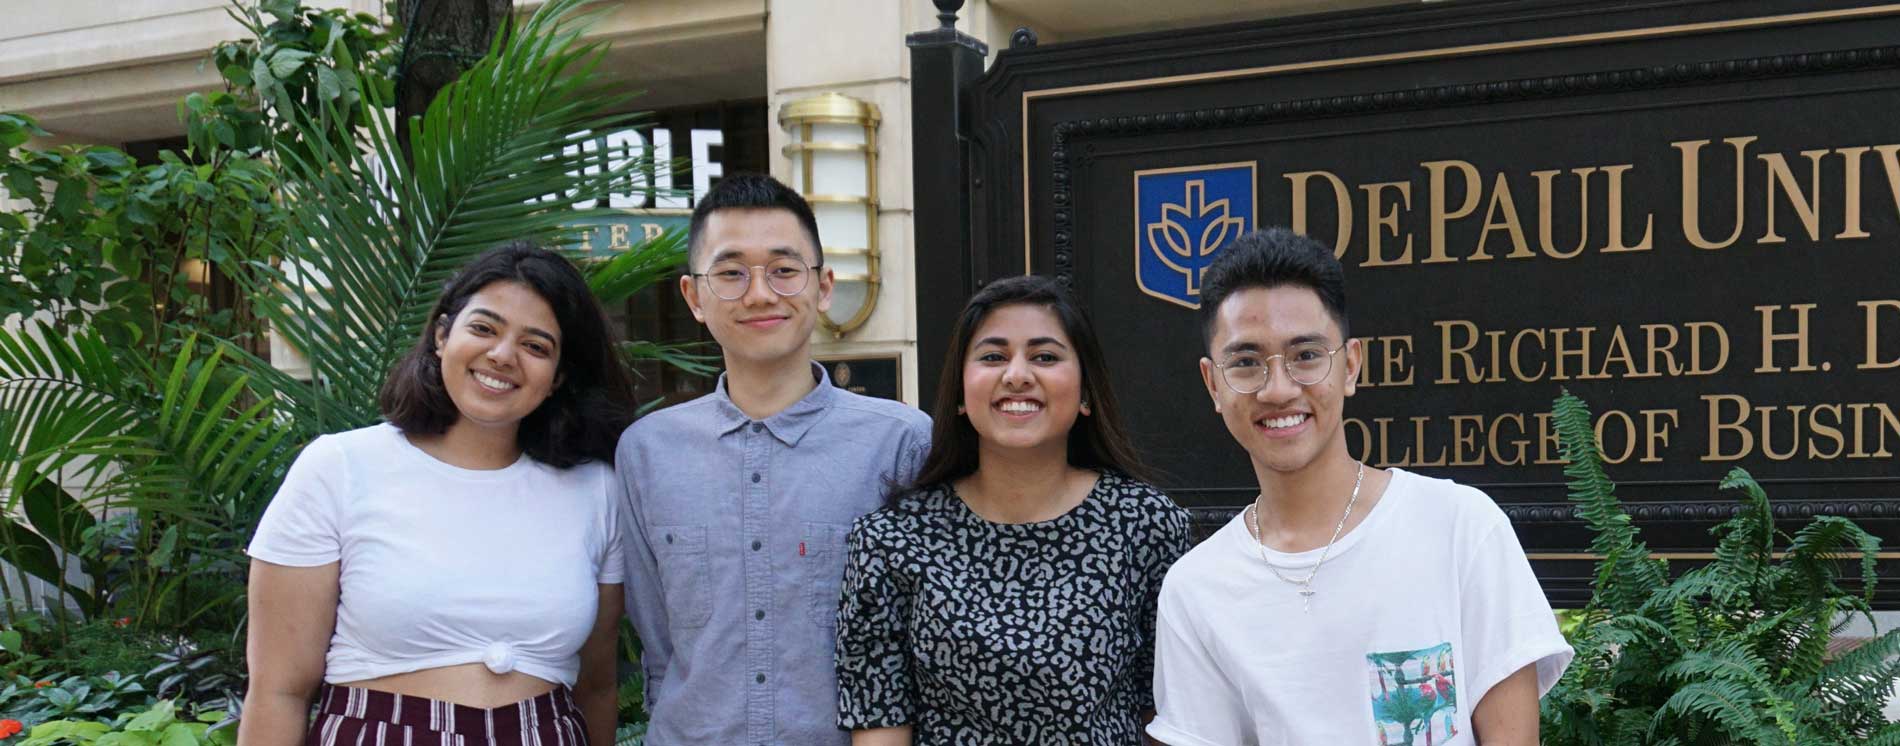 Four friends stand smiling in front of DePaul's College of business sign